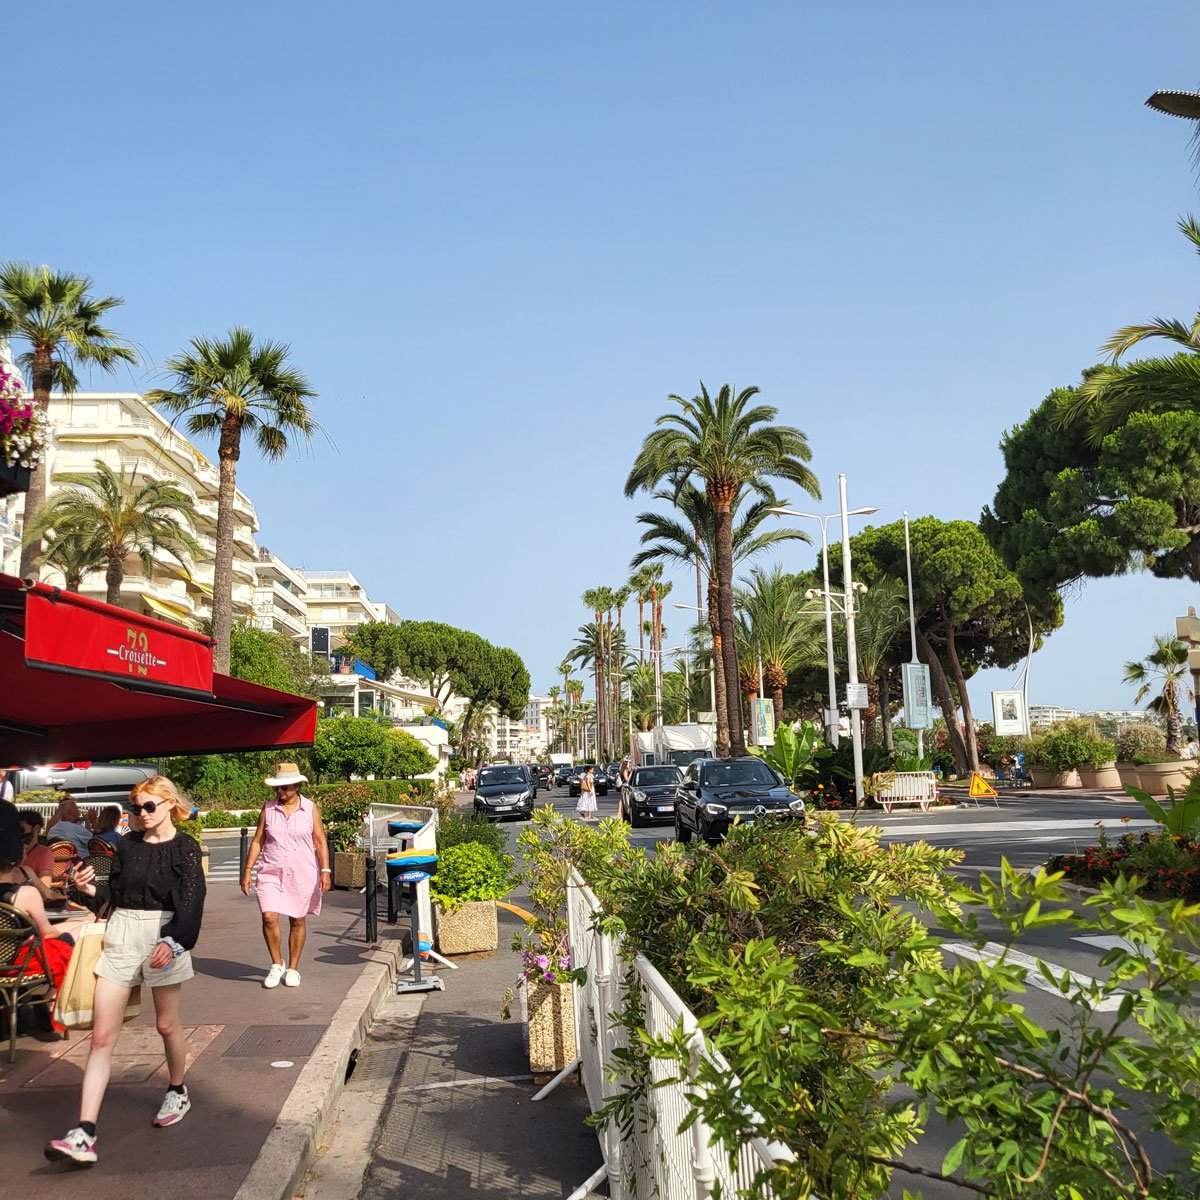 Promenade-Croisette-Street-Cannes-Lions-Creative-by-Collective-2-20220620_174228.jpg